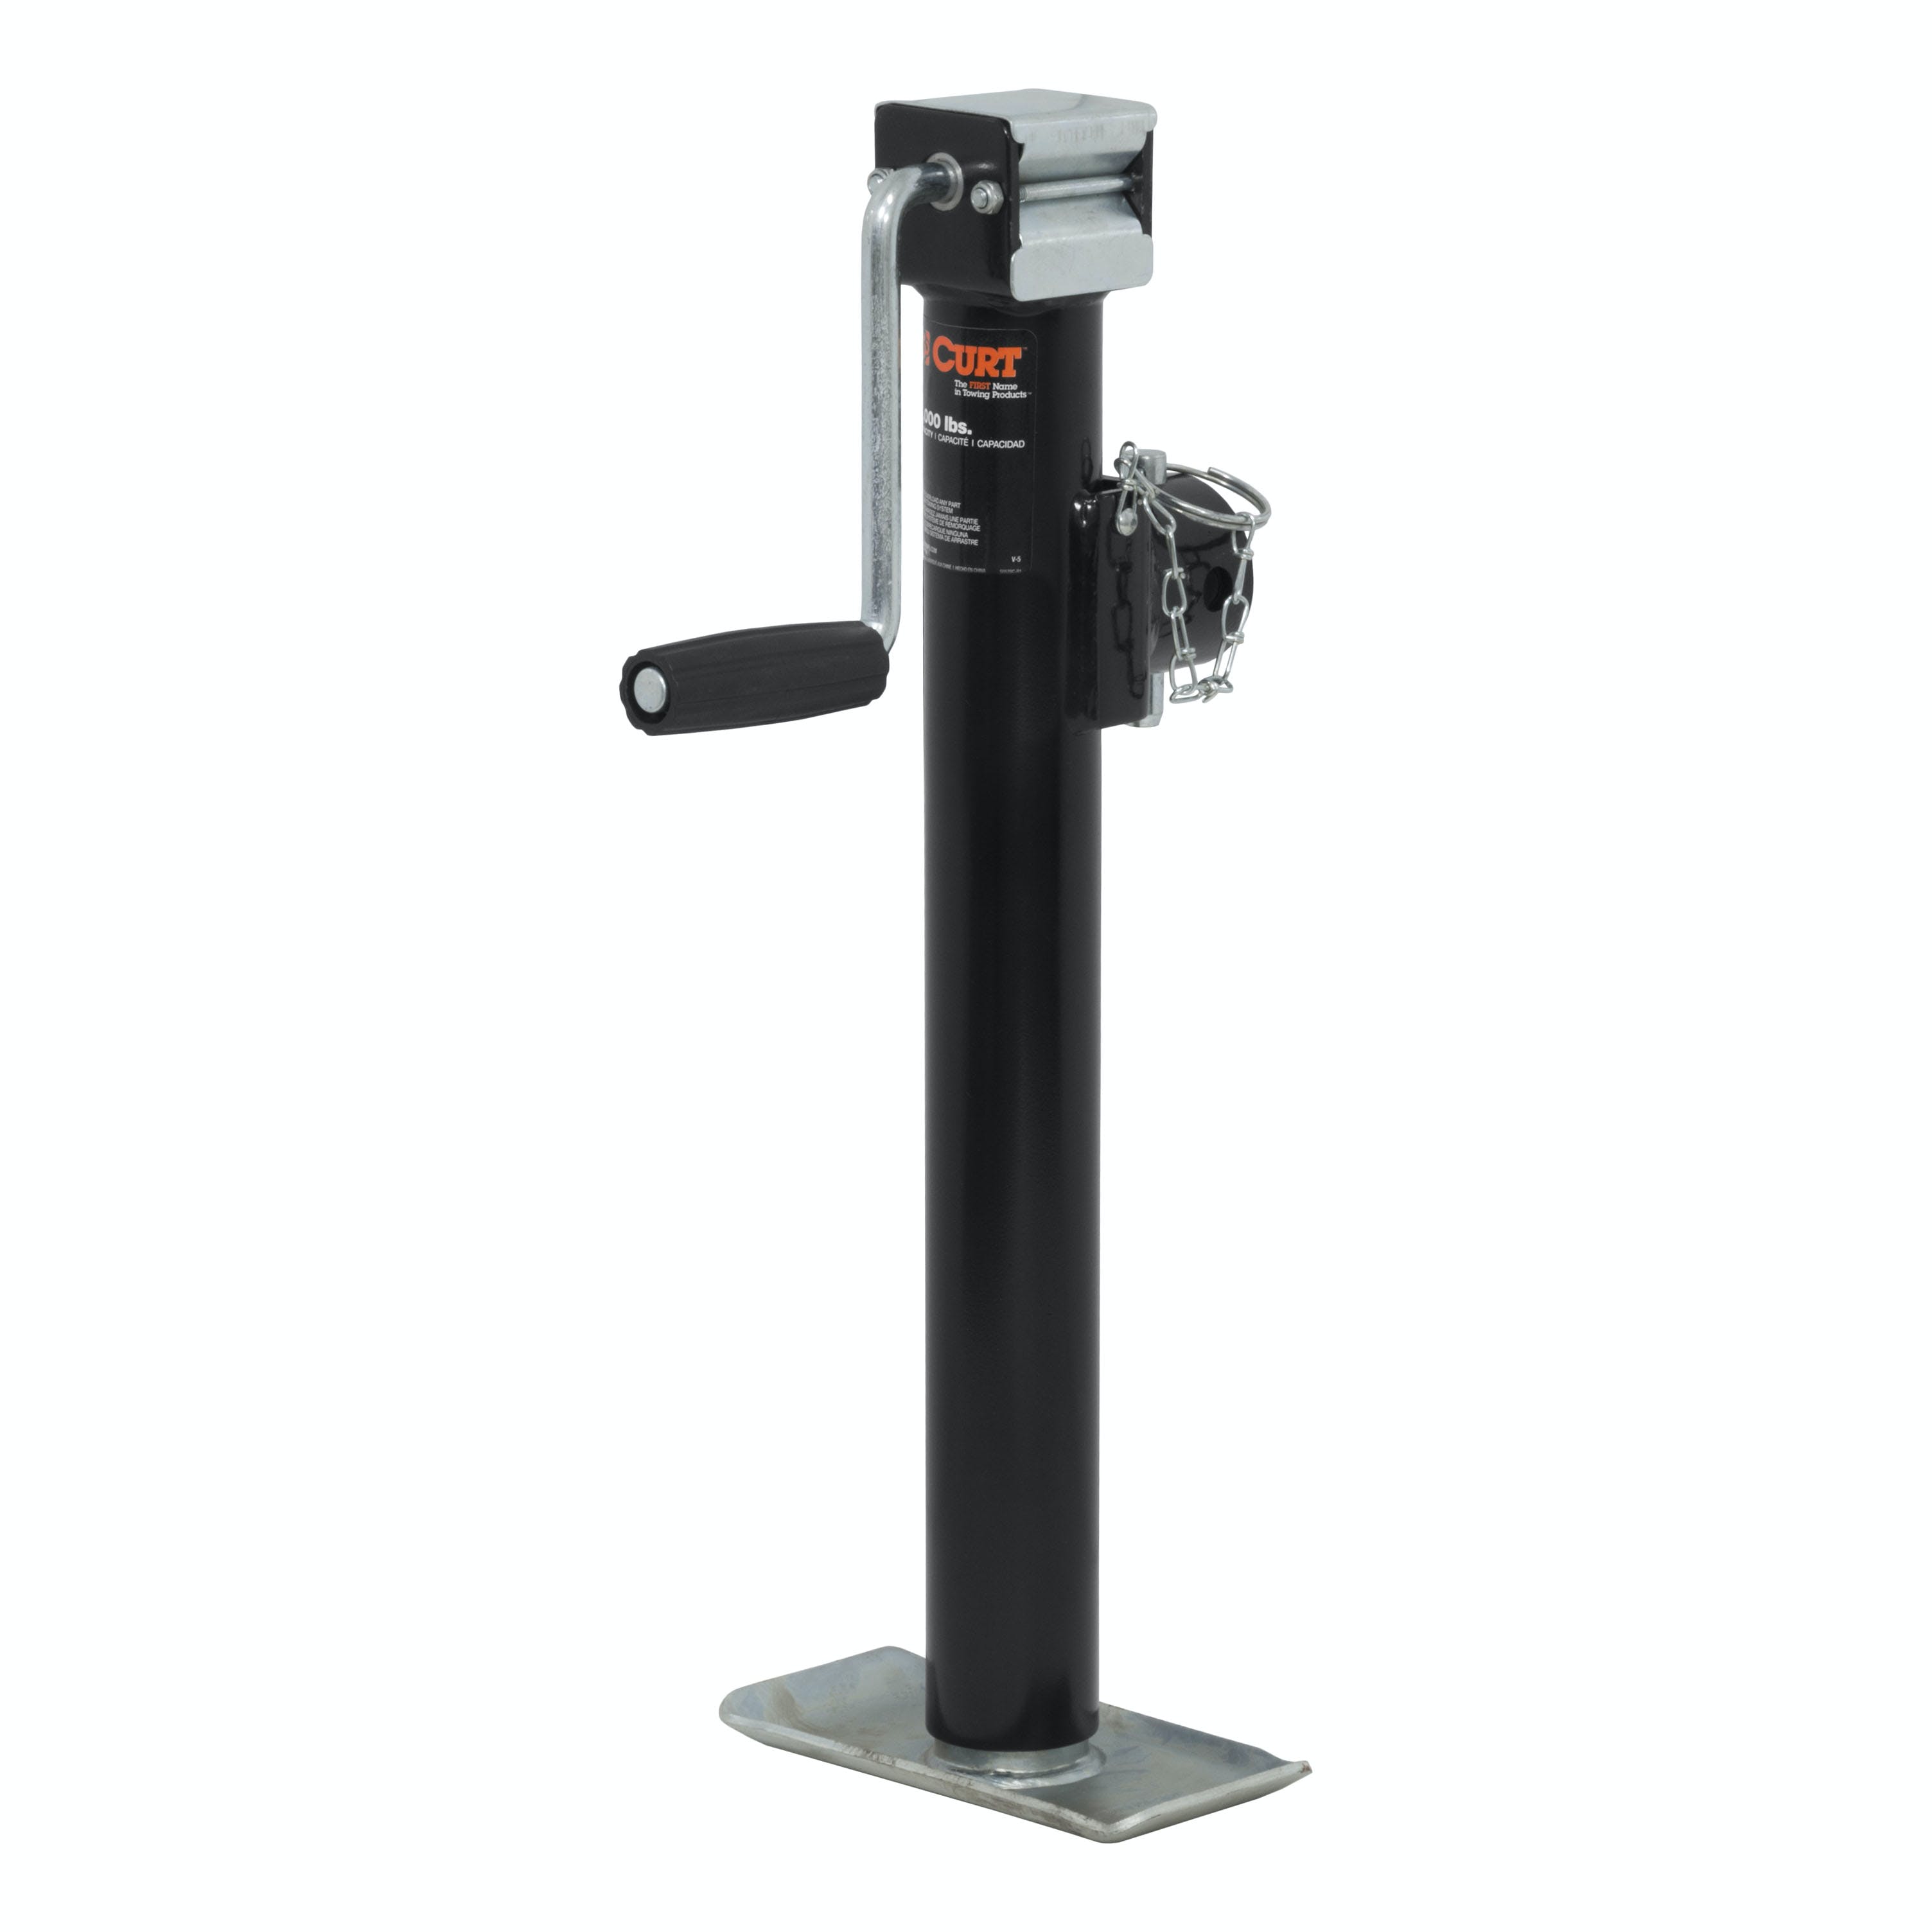 CURT 28324 Pipe-Mount Swivel Jack with Side Handle (2,000 lbs, 15 Travel)